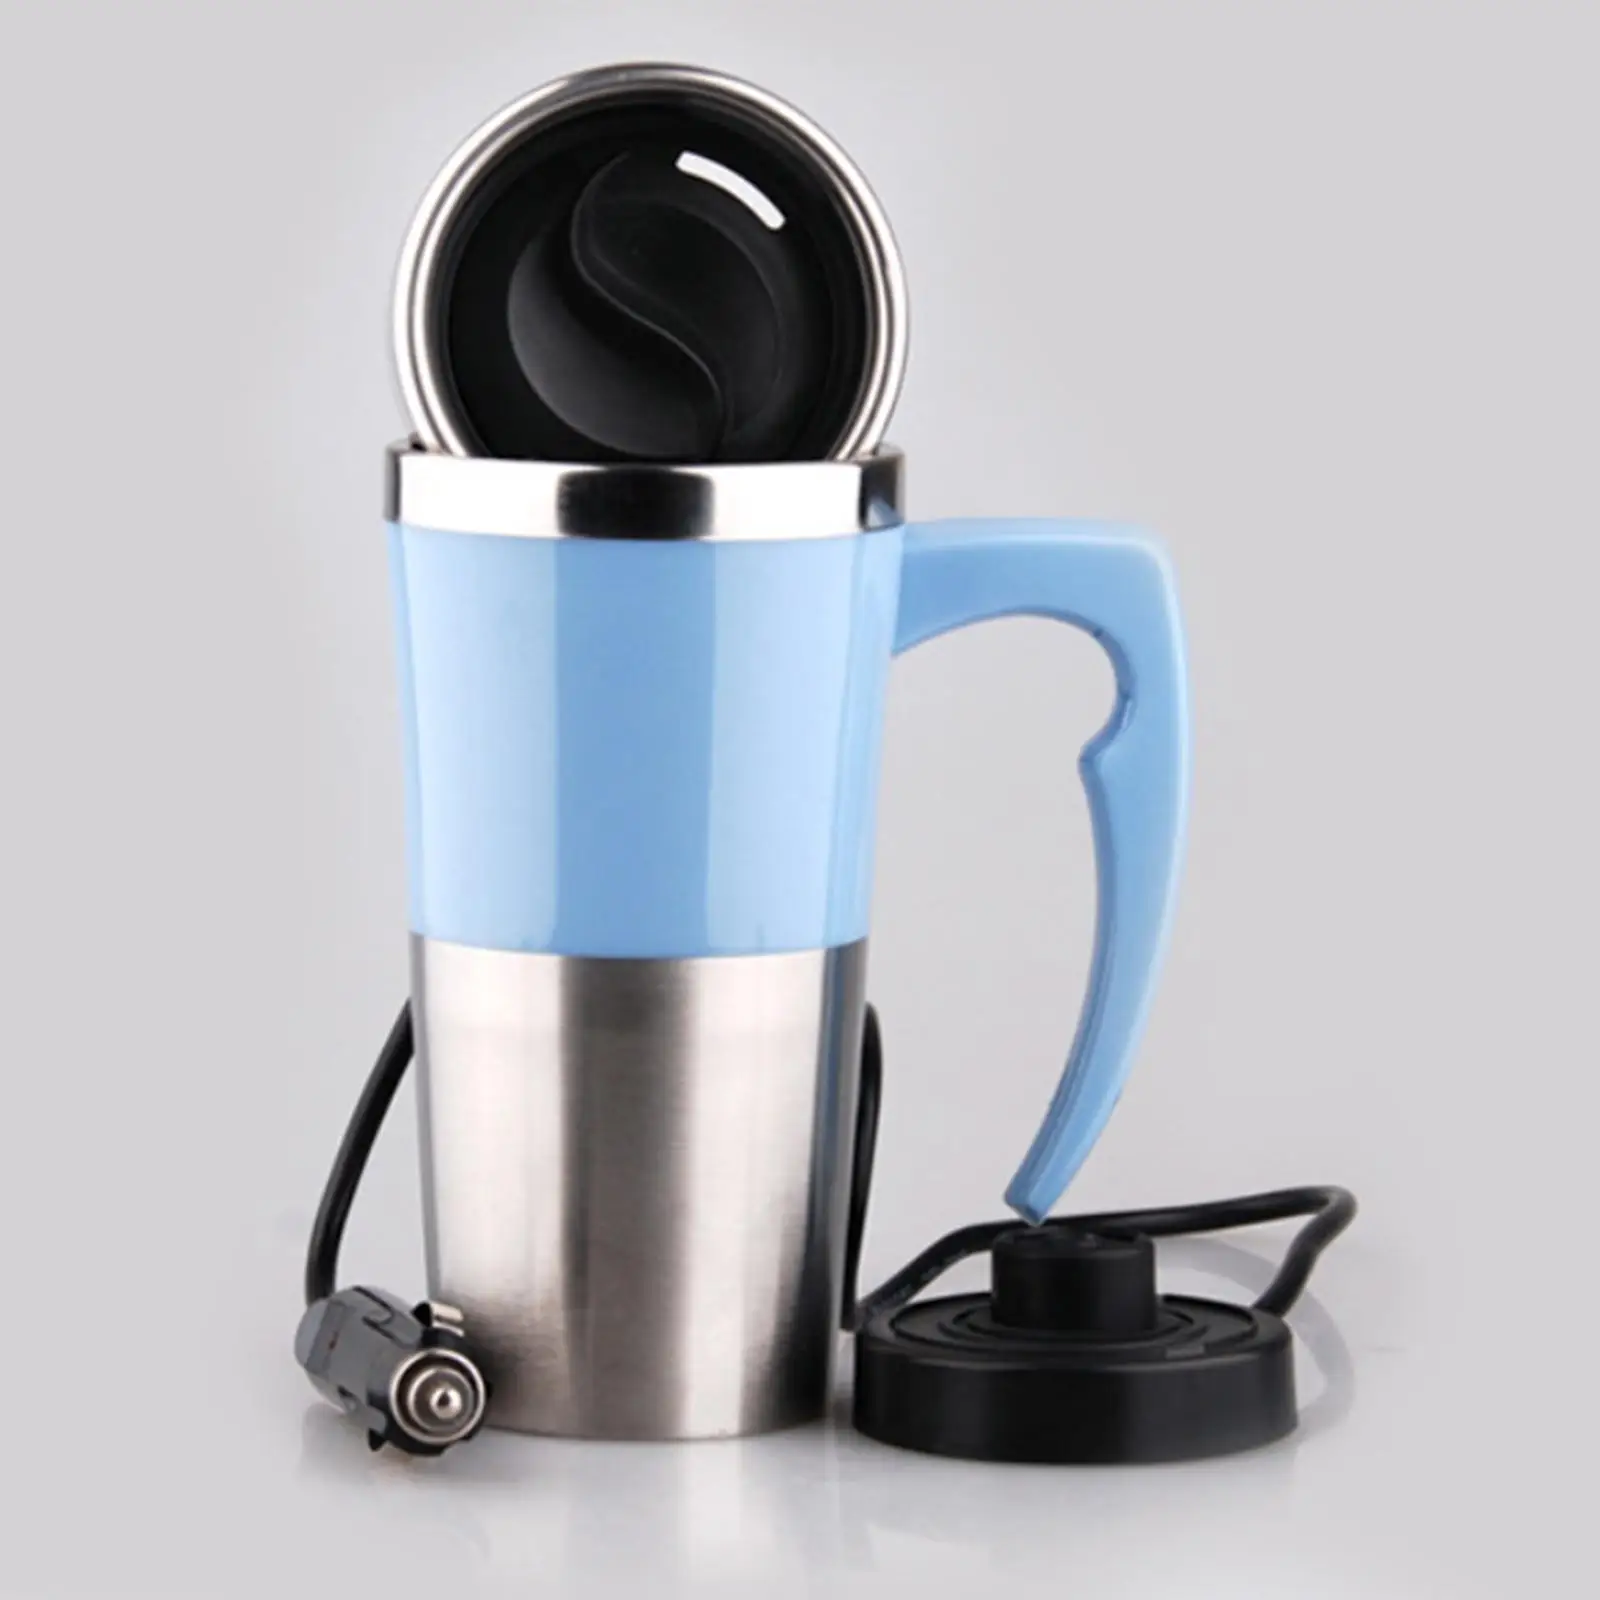  Kettle /12V/ 350ml/  Stainless Steel/ Mug/ Travel /Heating Cup/ Car  for Tea  Eggs Camping Boat